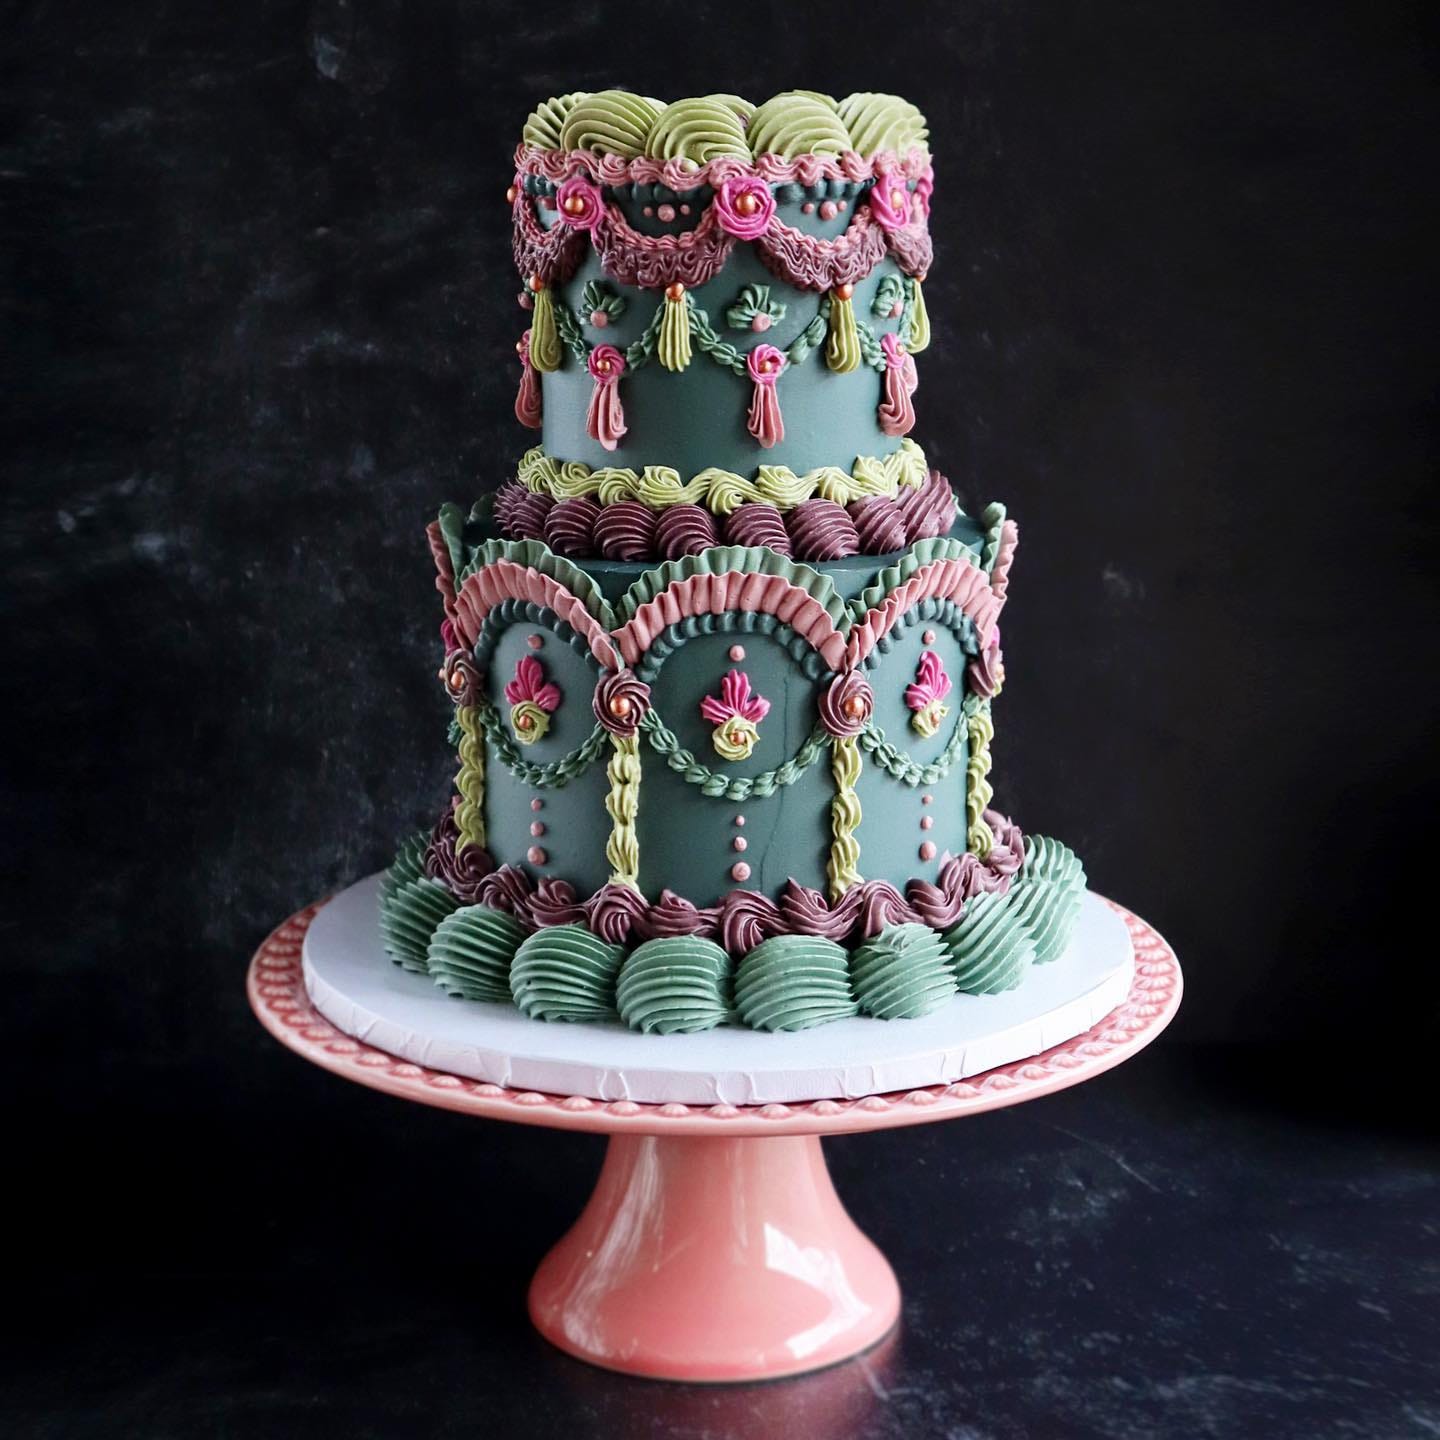 two-tier cake with all sorts of piping embellishments